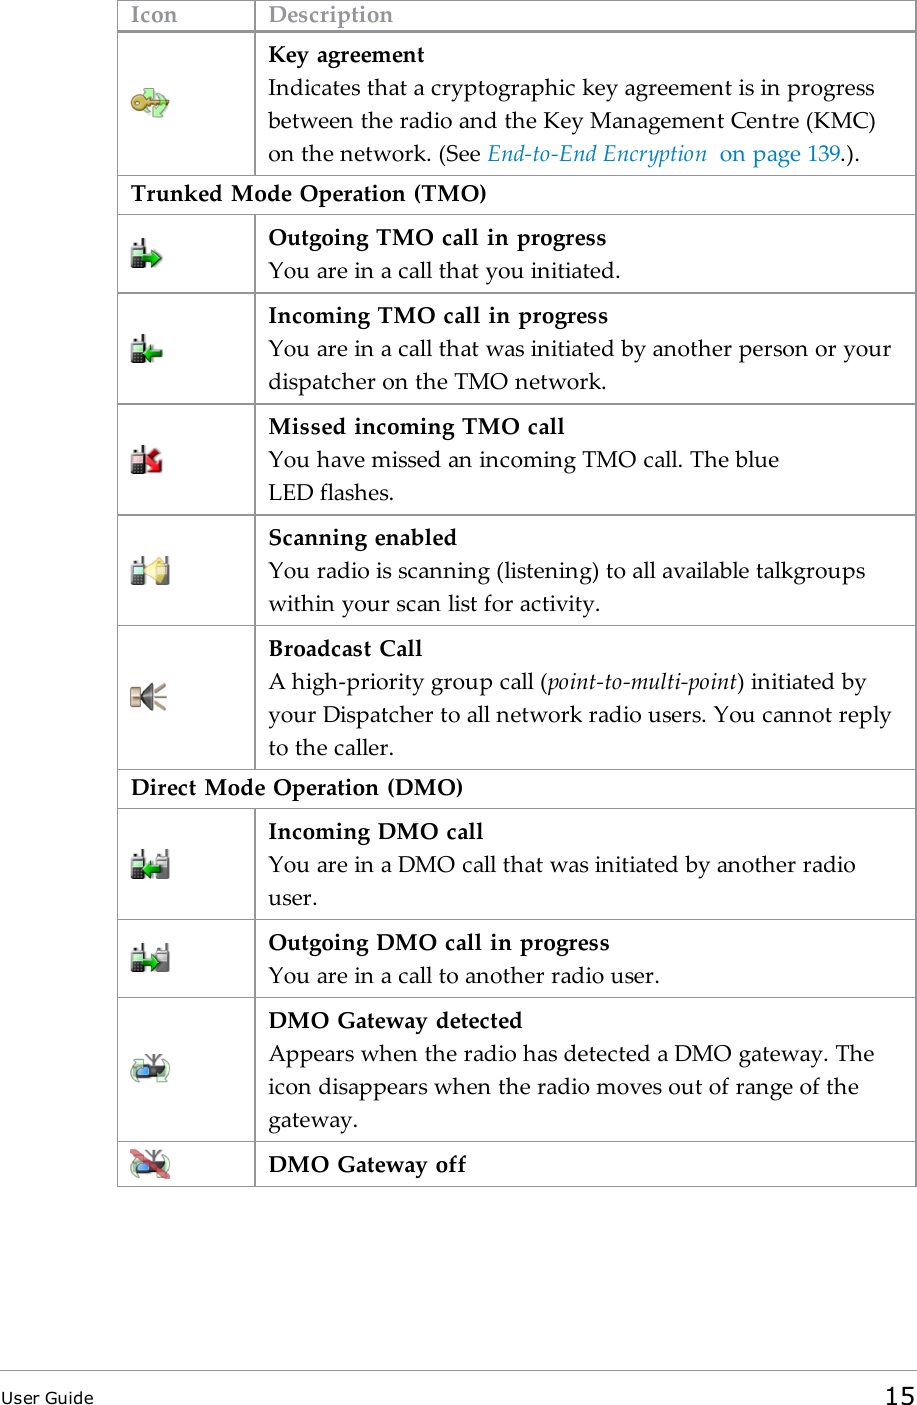 Icon DescriptionKey agreementIndicates that a cryptographic key agreement is in progressbetween the radio and the Key Management Centre (KMC)on the network. (See End-to-End Encryption on page139.).Trunked Mode Operation (TMO)Outgoing TMOcall in progressYou are in a call that you initiated.Incoming TMO call in progressYou are in a call that was initiated by another person or yourdispatcher on the TMO network.Missed incoming TMO callYou have missed an incoming TMO call. The blueLEDflashes.Scanning enabledYou radio is scanning (listening) to all available talkgroupswithin your scan list for activity.Broadcast CallA high-priority group call (point-to-multi-point) initiated byyour Dispatcher to all network radio users. You cannot replyto the caller.Direct Mode Operation (DMO)Incoming DMO callYou are in a DMO call that was initiated by another radiouser.Outgoing DMO call in progressYou are in a call to another radio user.DMOGateway detectedAppears when the radio has detected a DMO gateway. Theicon disappears when the radio moves out of range of thegateway.DMO Gateway offUser Guide 15